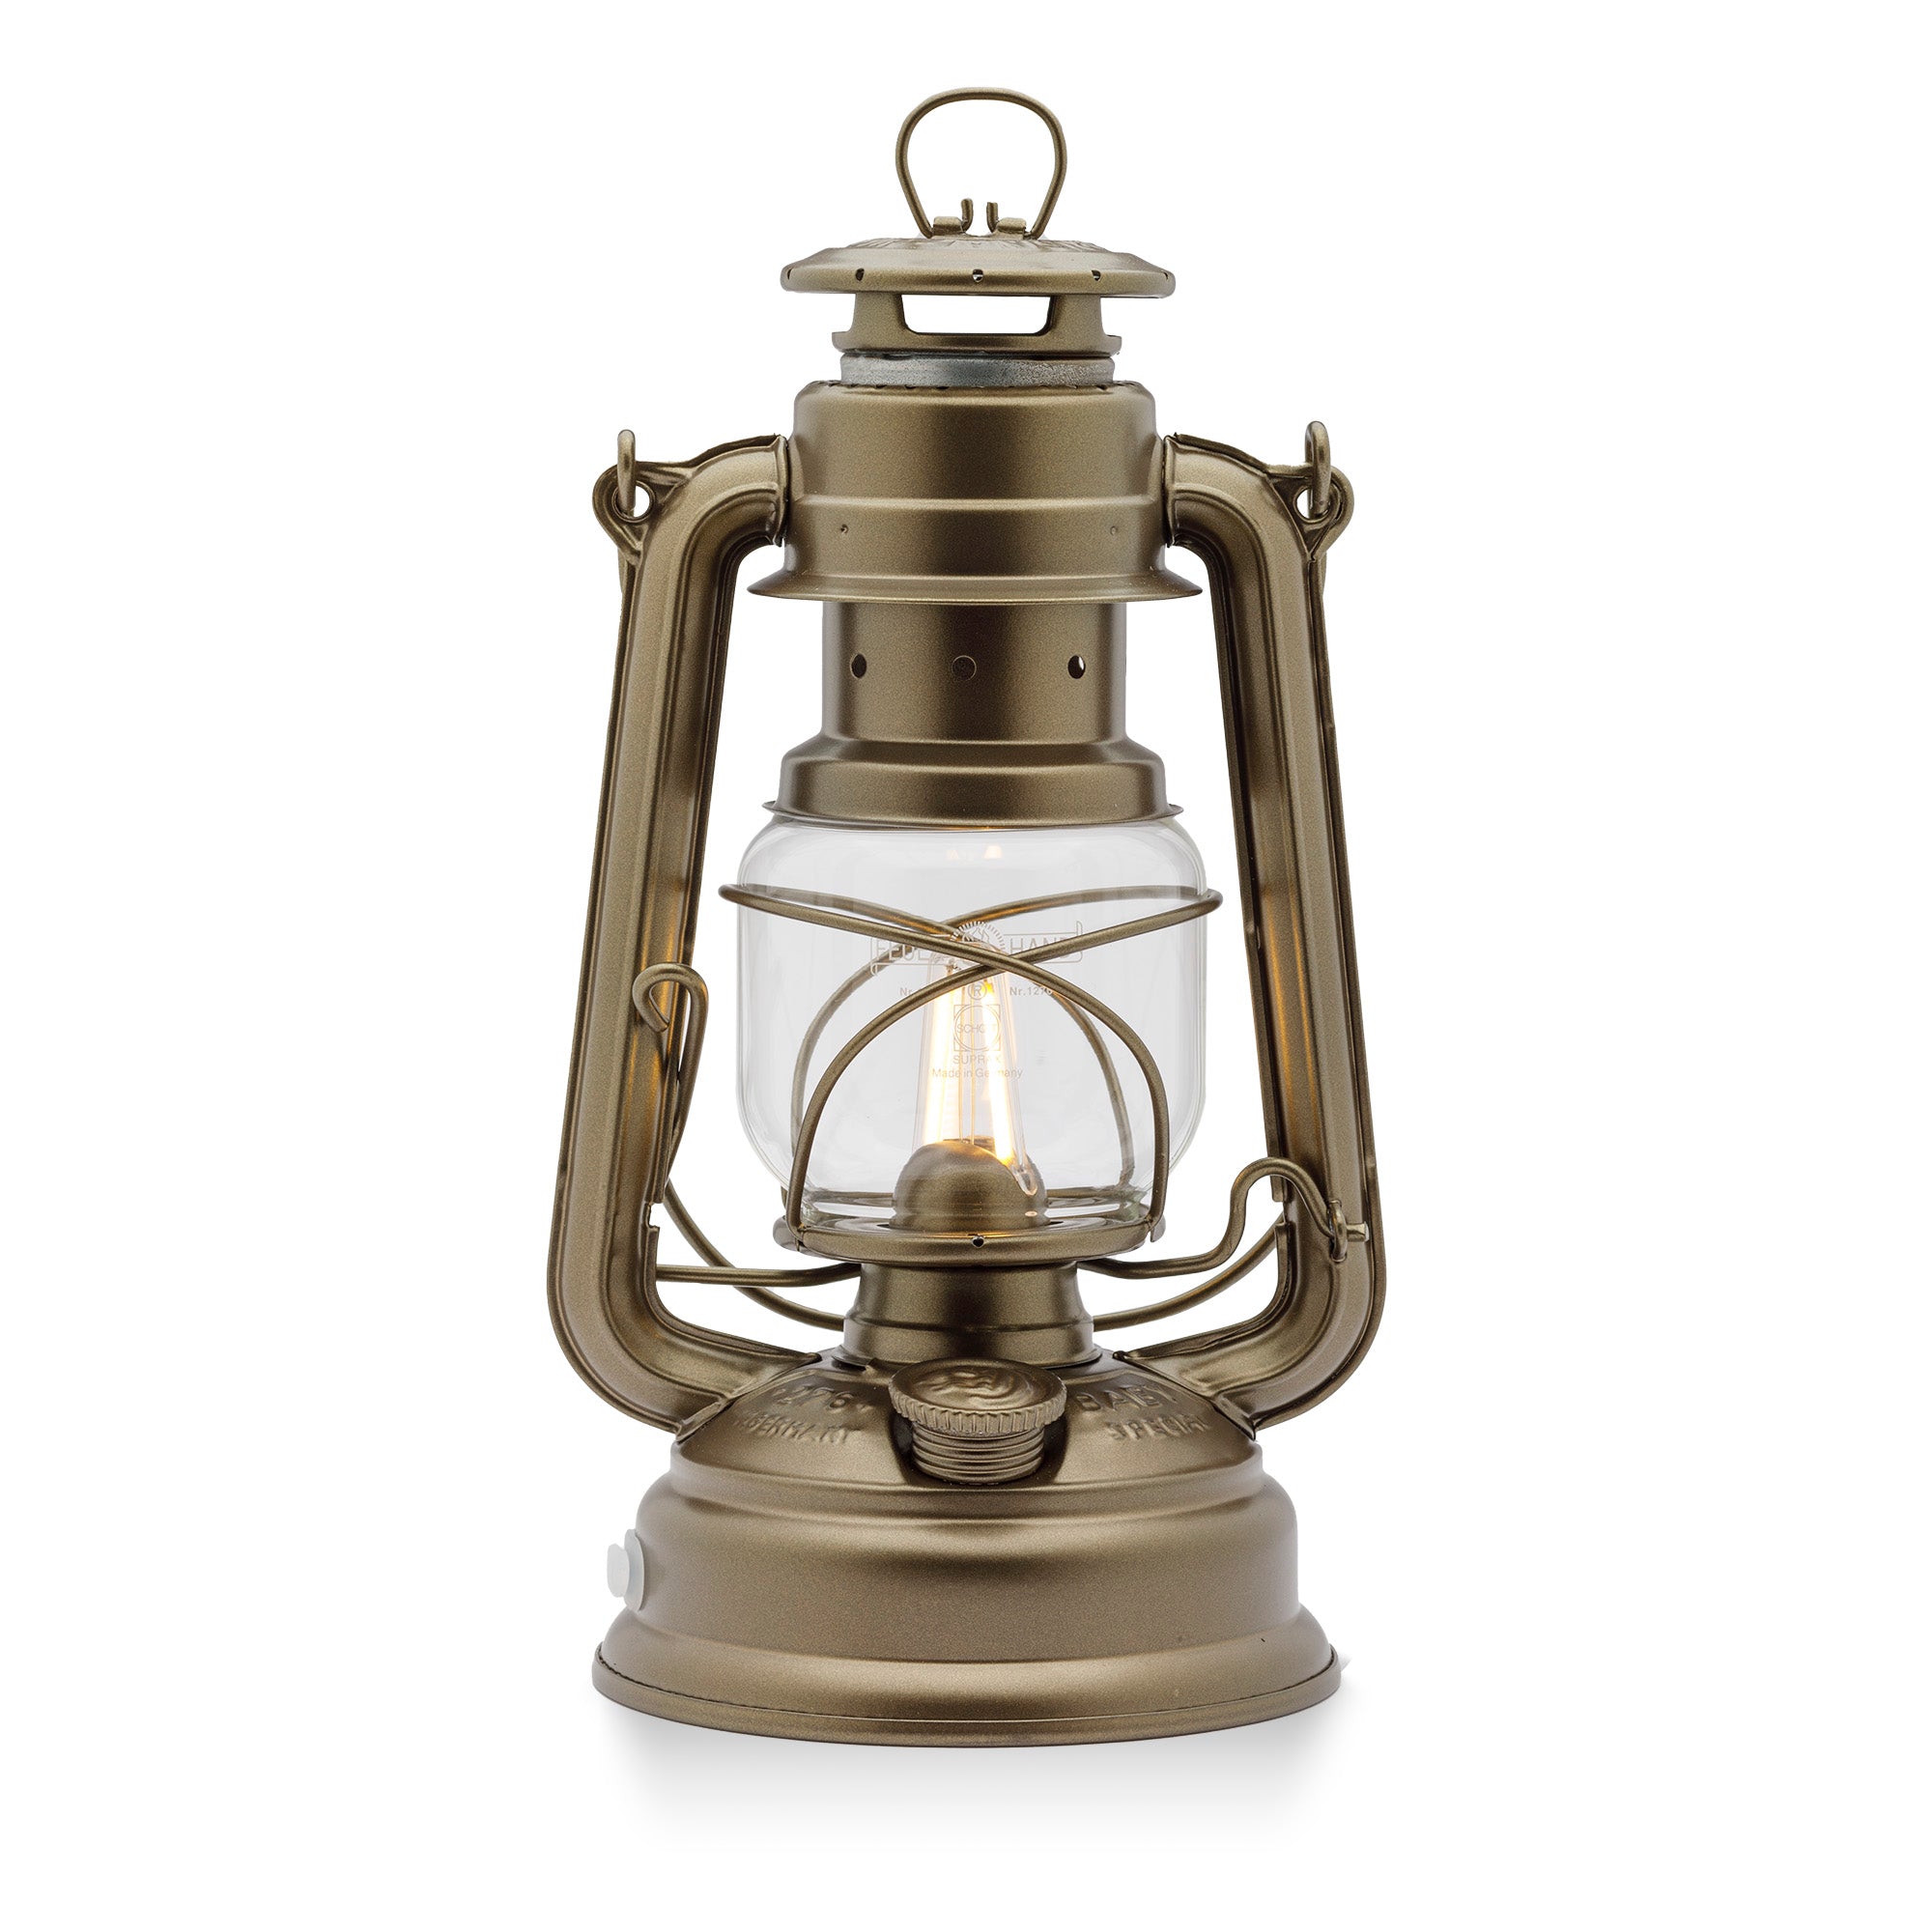 LED Lantern Baby Special 276 | Feuerhand